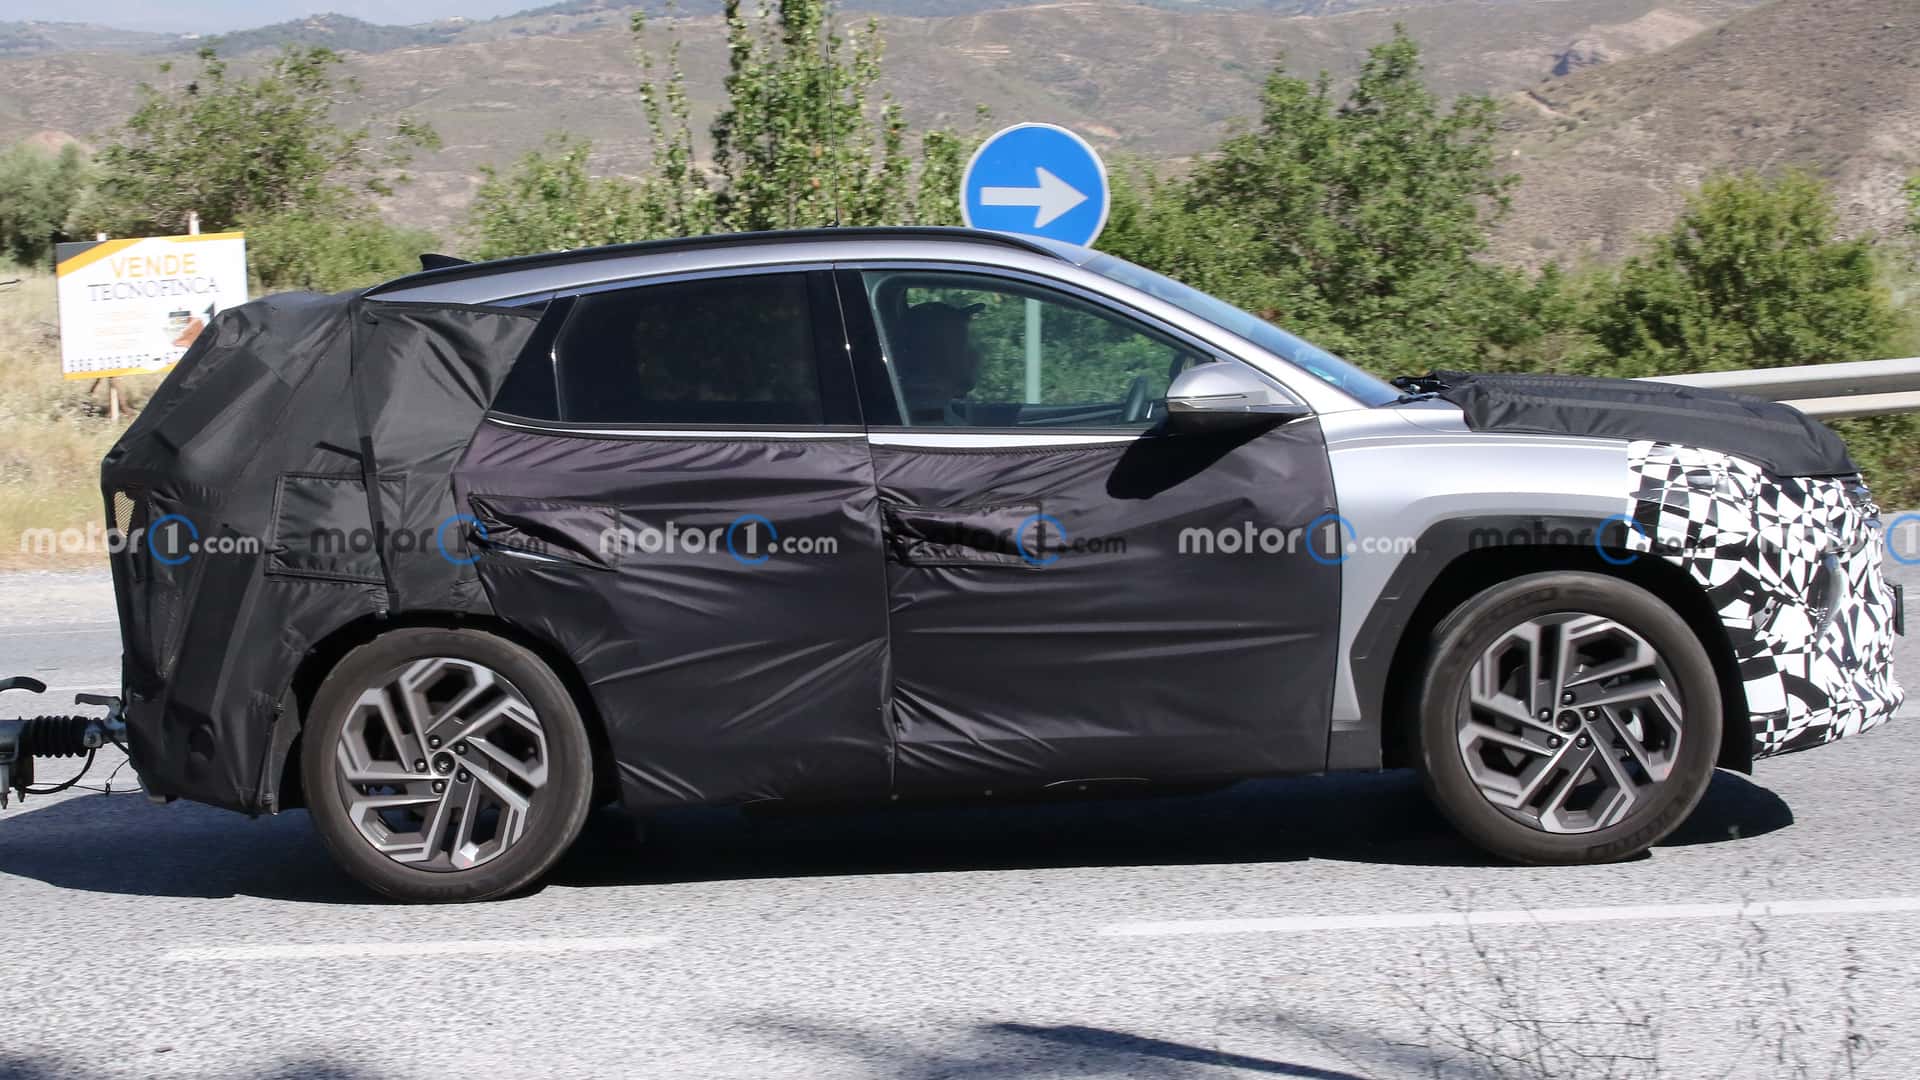 Hyundai Tucson Facelift spotted on test drive, promising to be launched soon hyundai-tucson-facelift-side-view-spy-photo.jpg